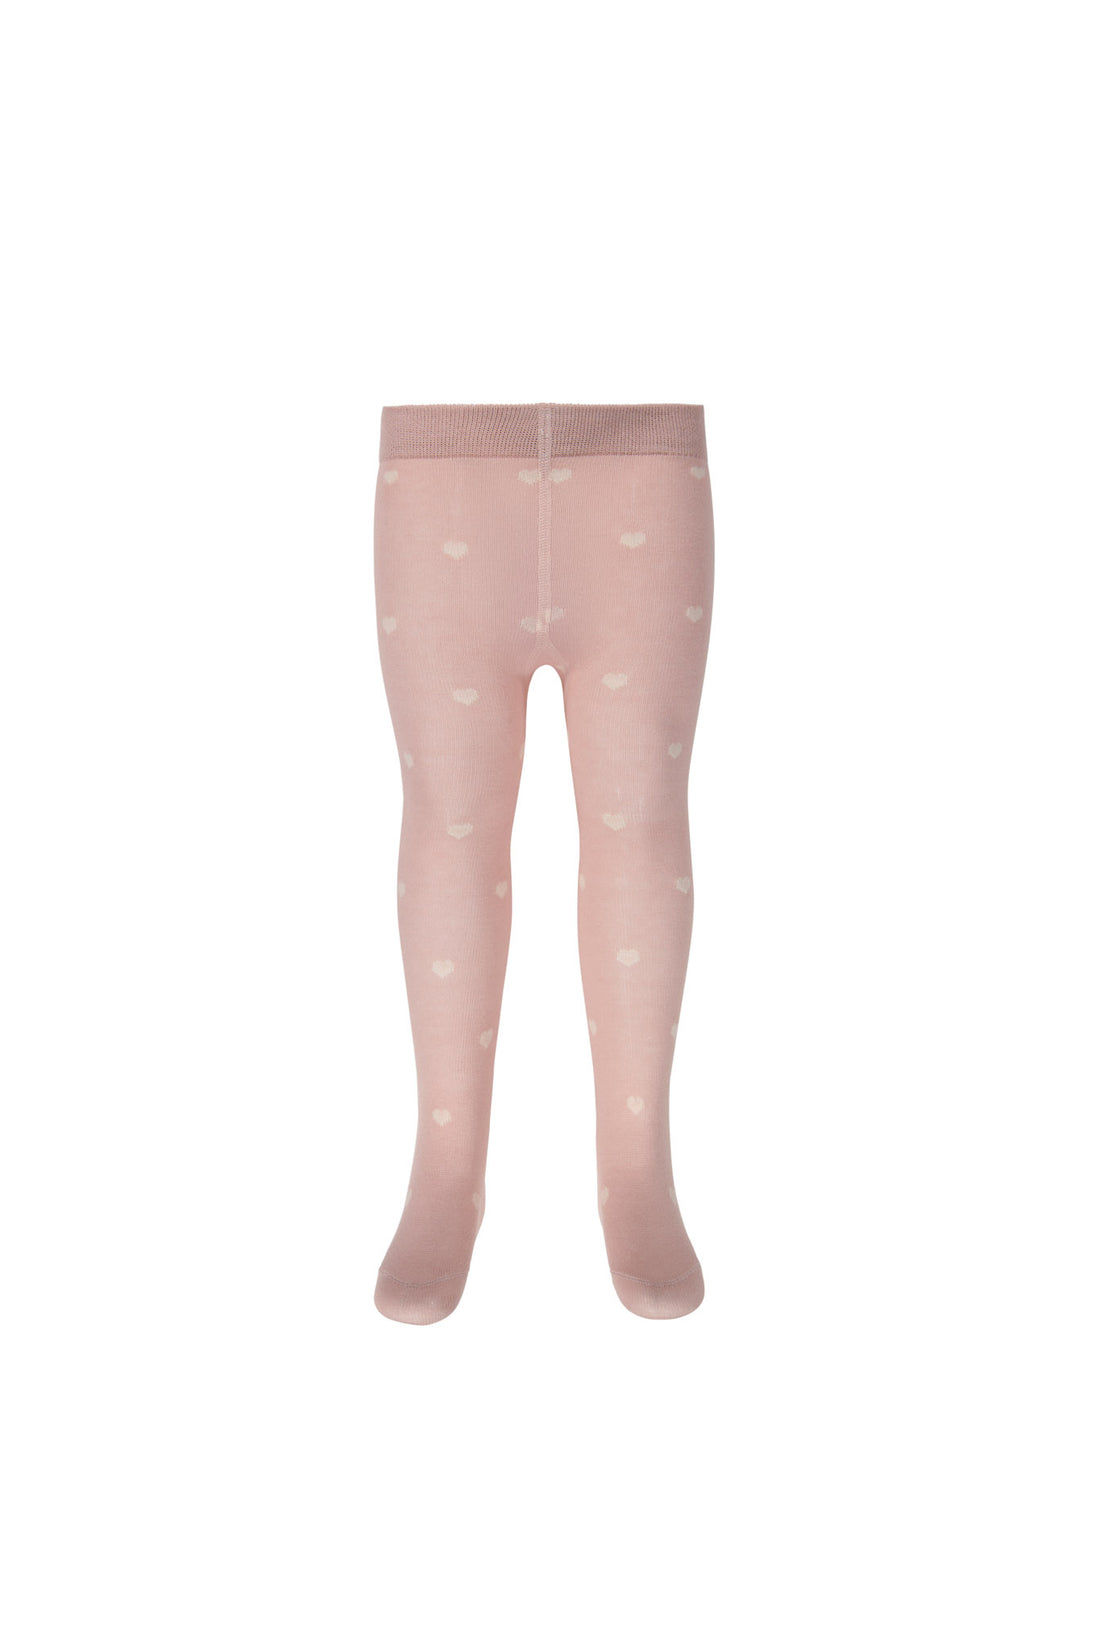 Jacquard Heart Tight - Mon Amour Rose Childrens Tight from Jamie Kay NZ